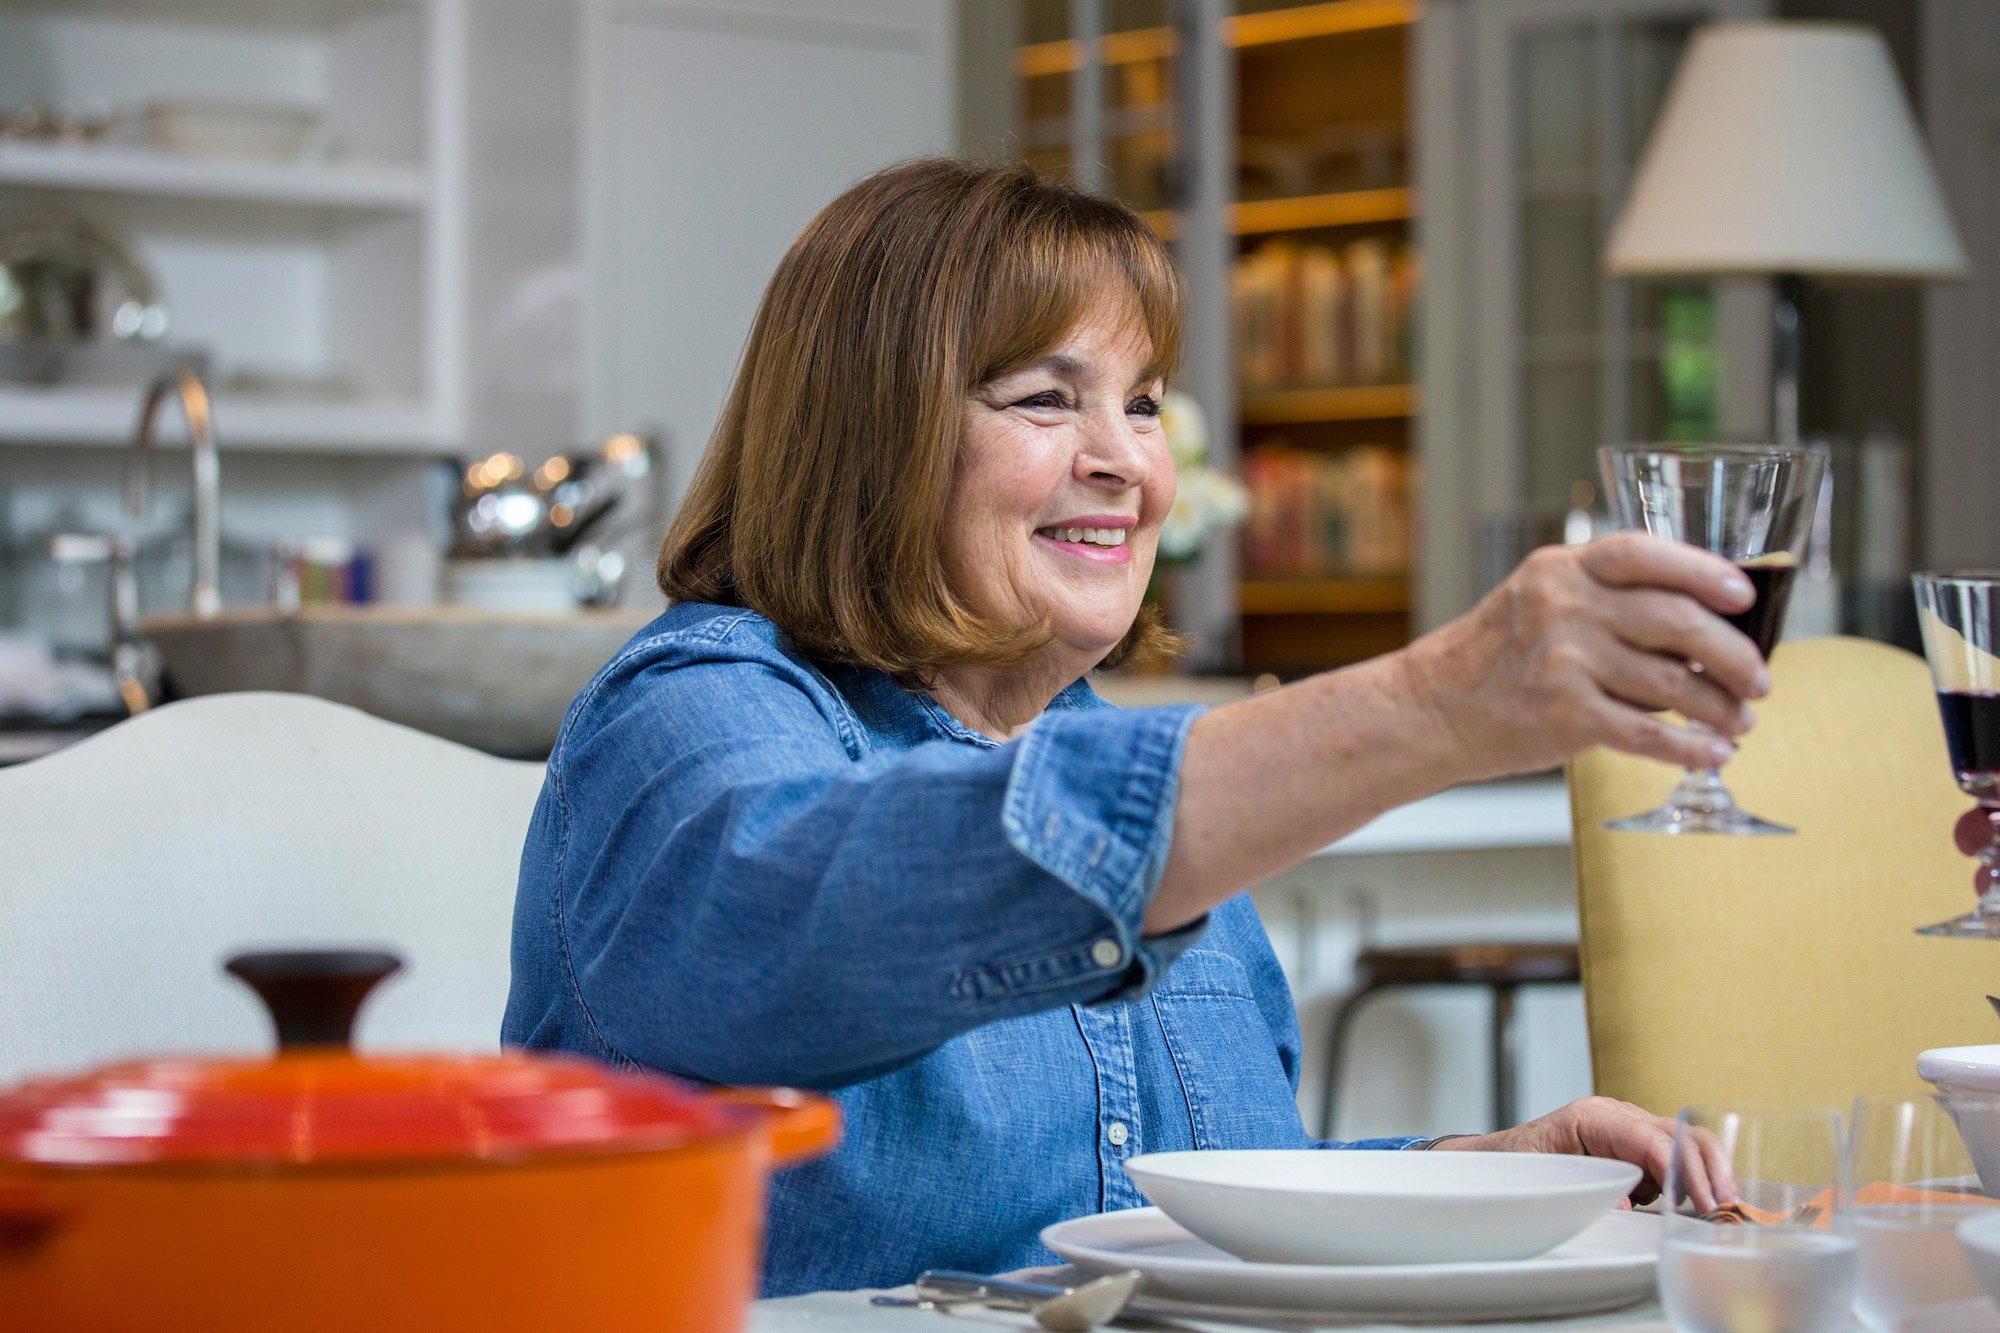 Ina Garten wears a blue shirt while smiling and toasting with a glass of wine